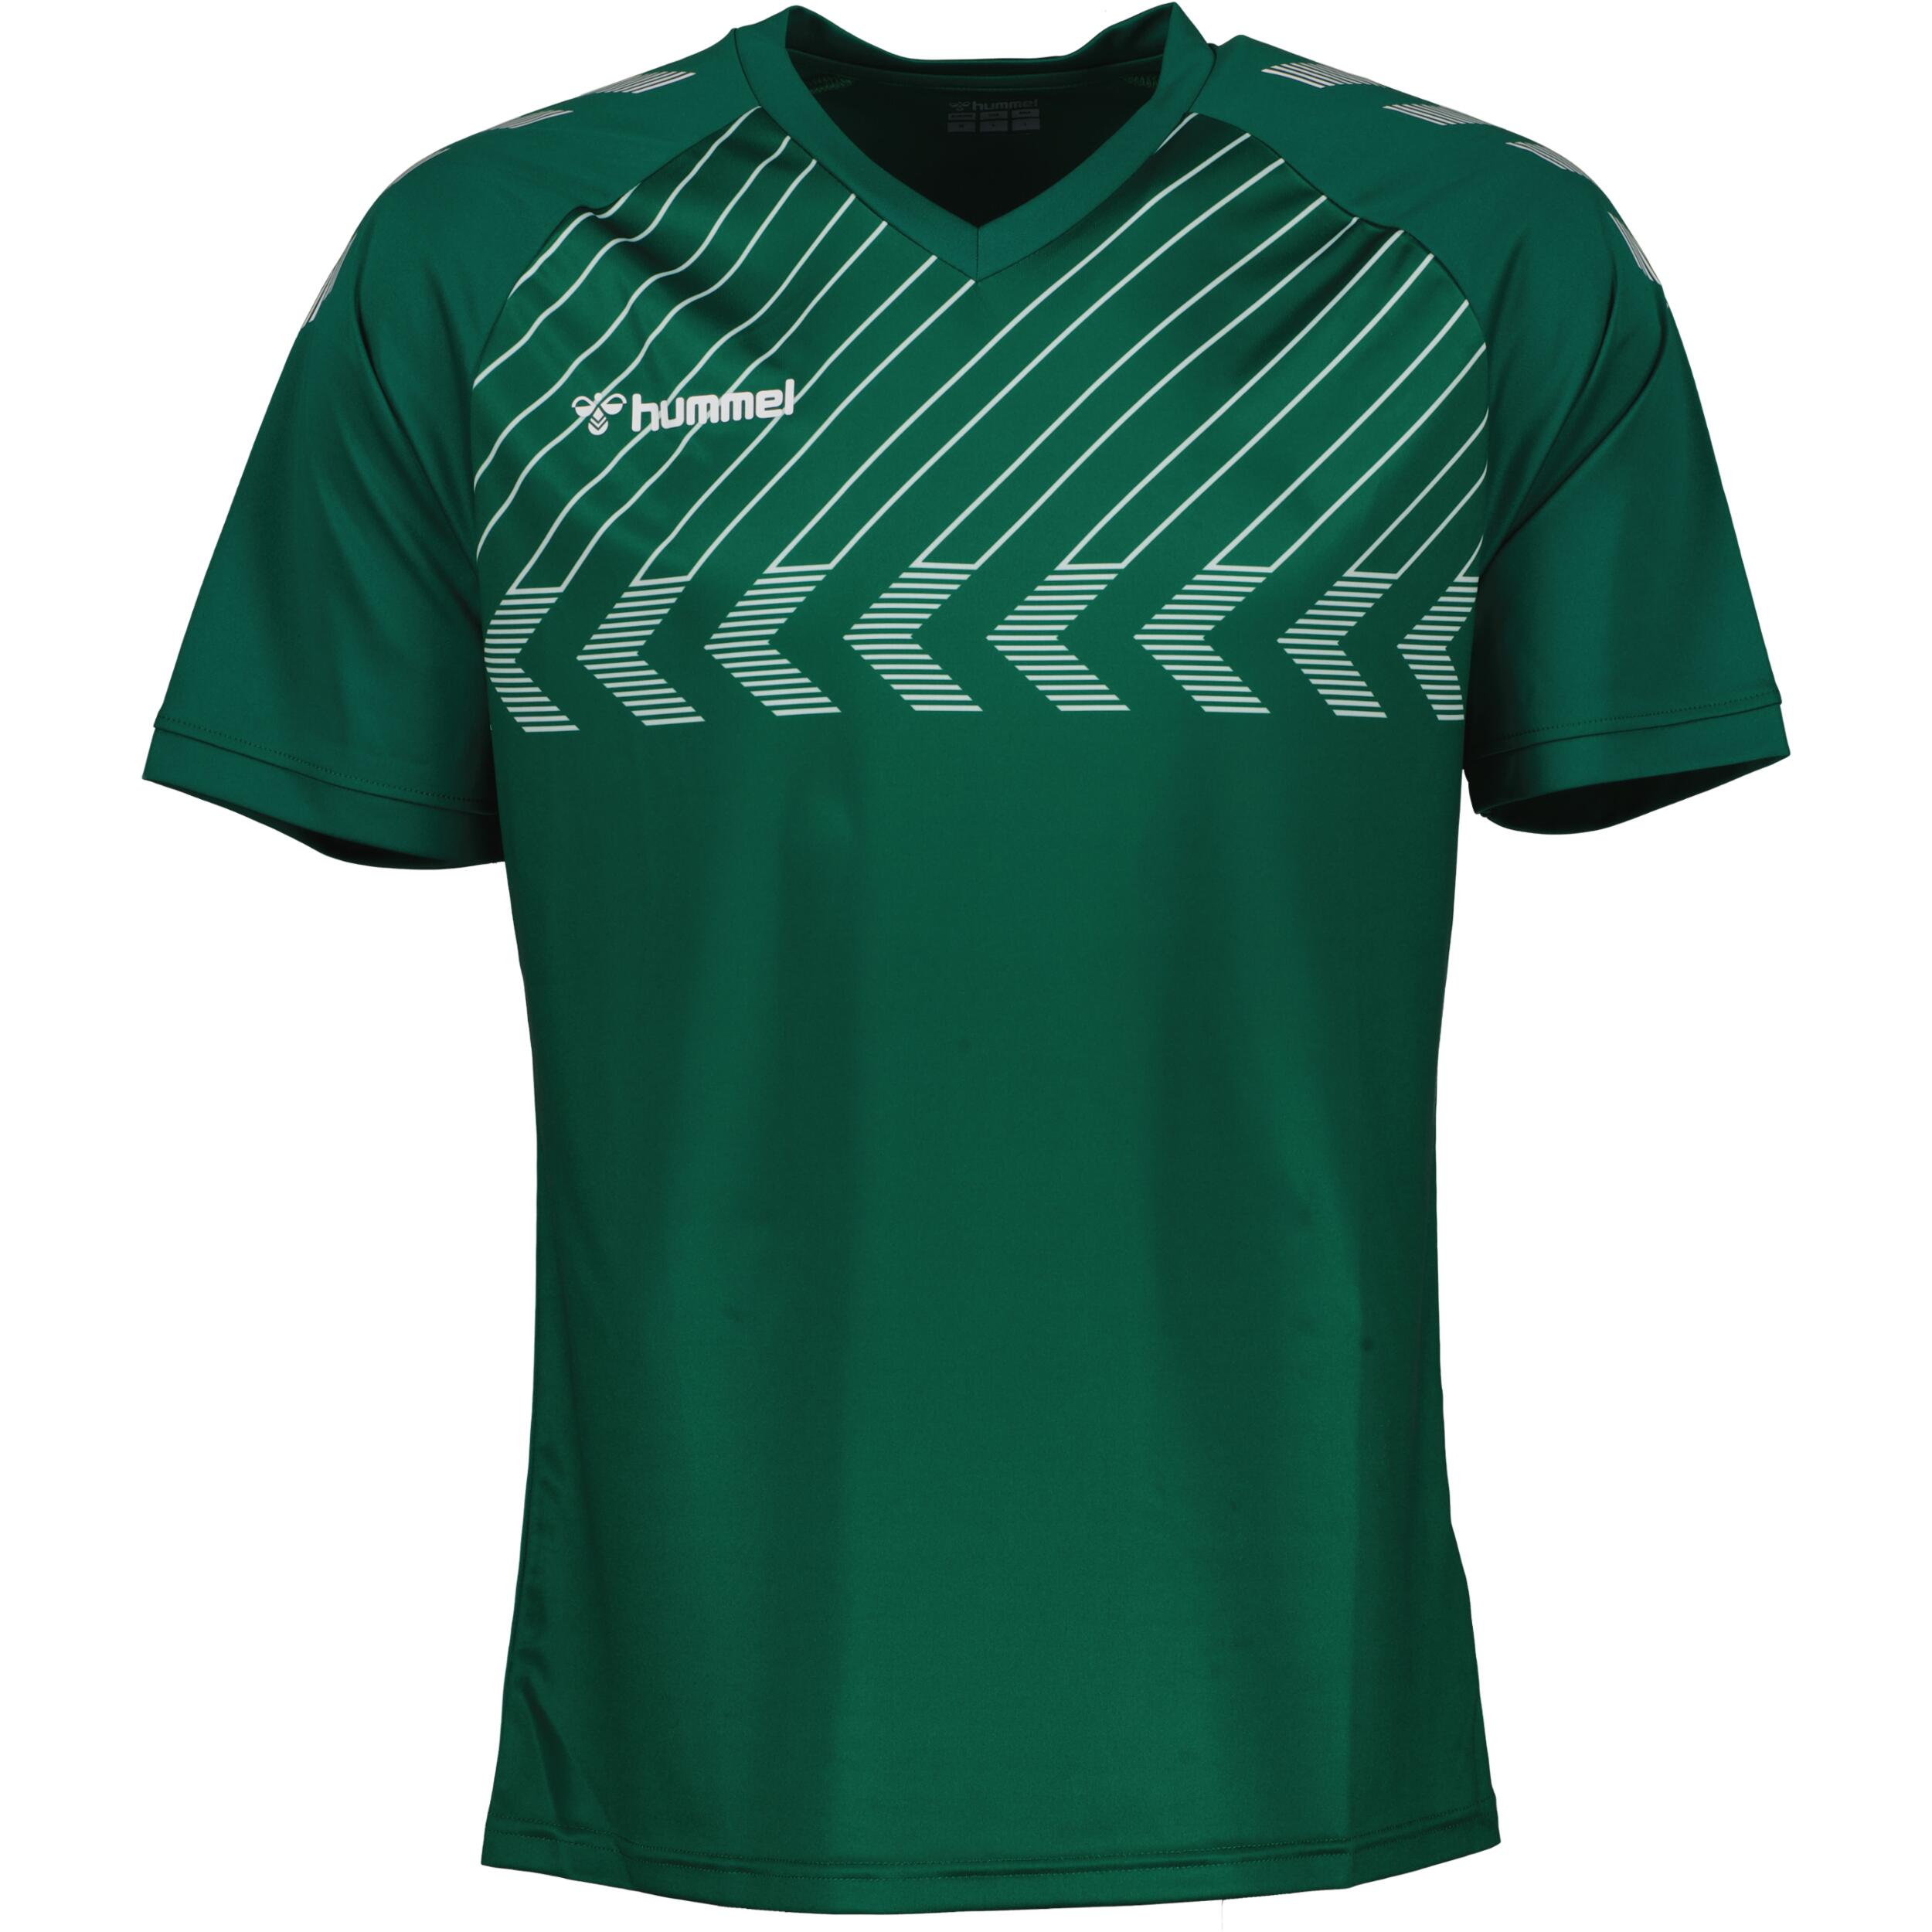 Poly jersey for men, great for football, in evergreen 1/3